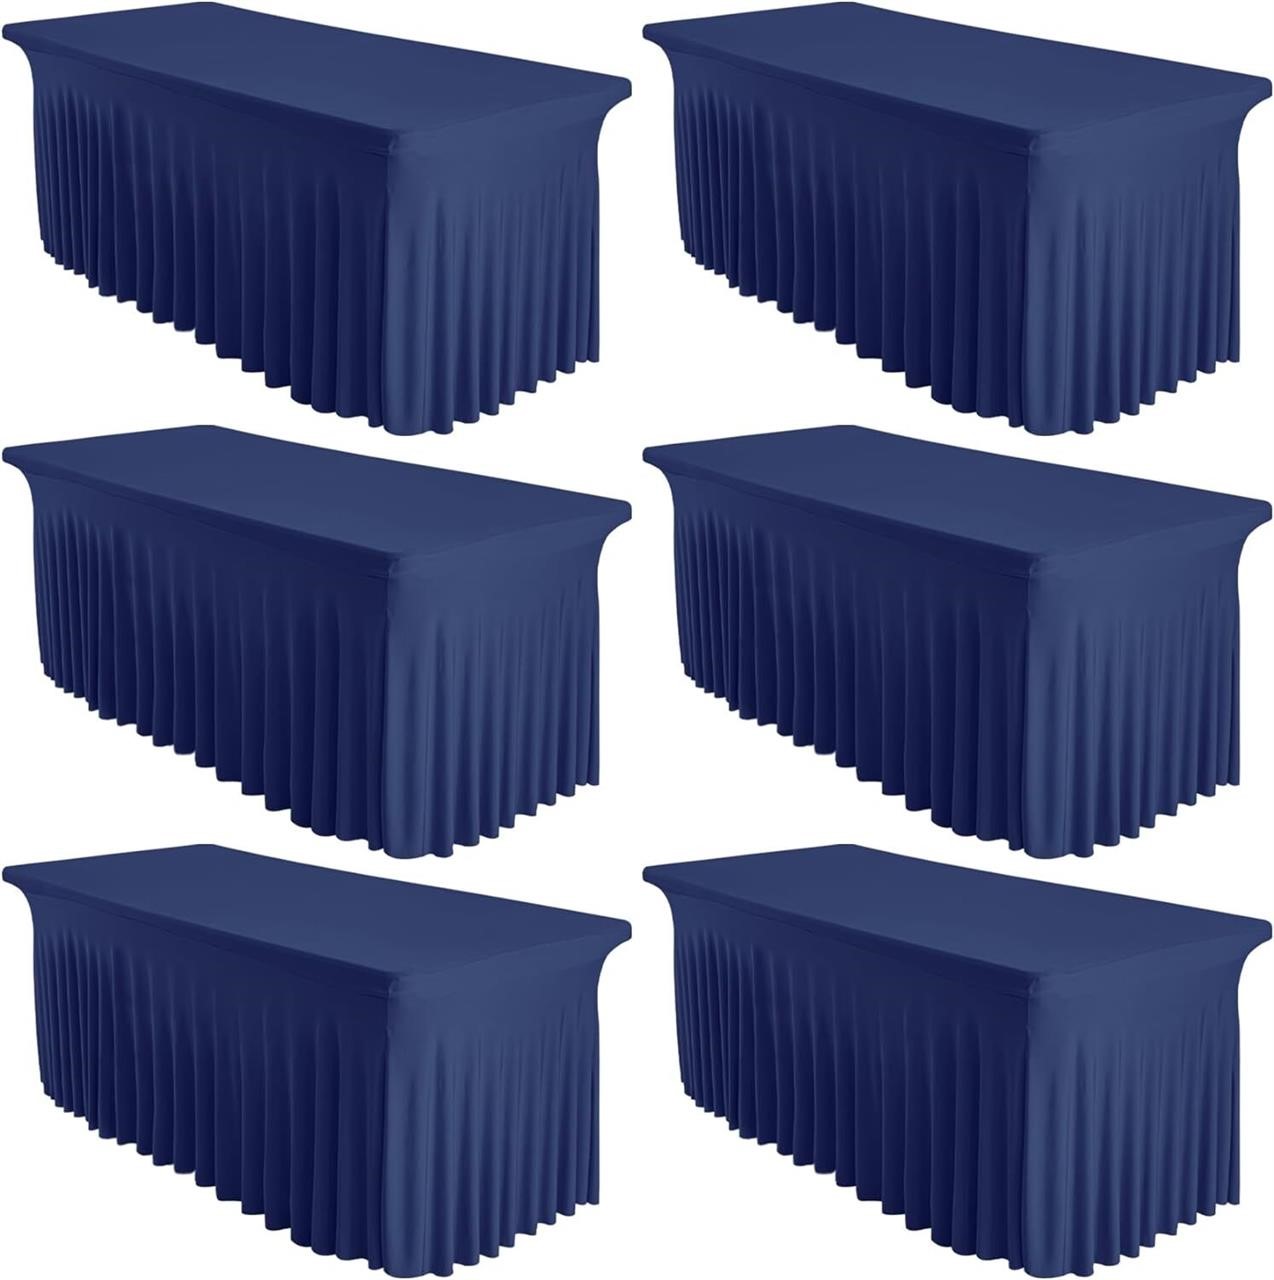 $100  6 Pack 8FT Navy Spandex Table Skirts (96x30)